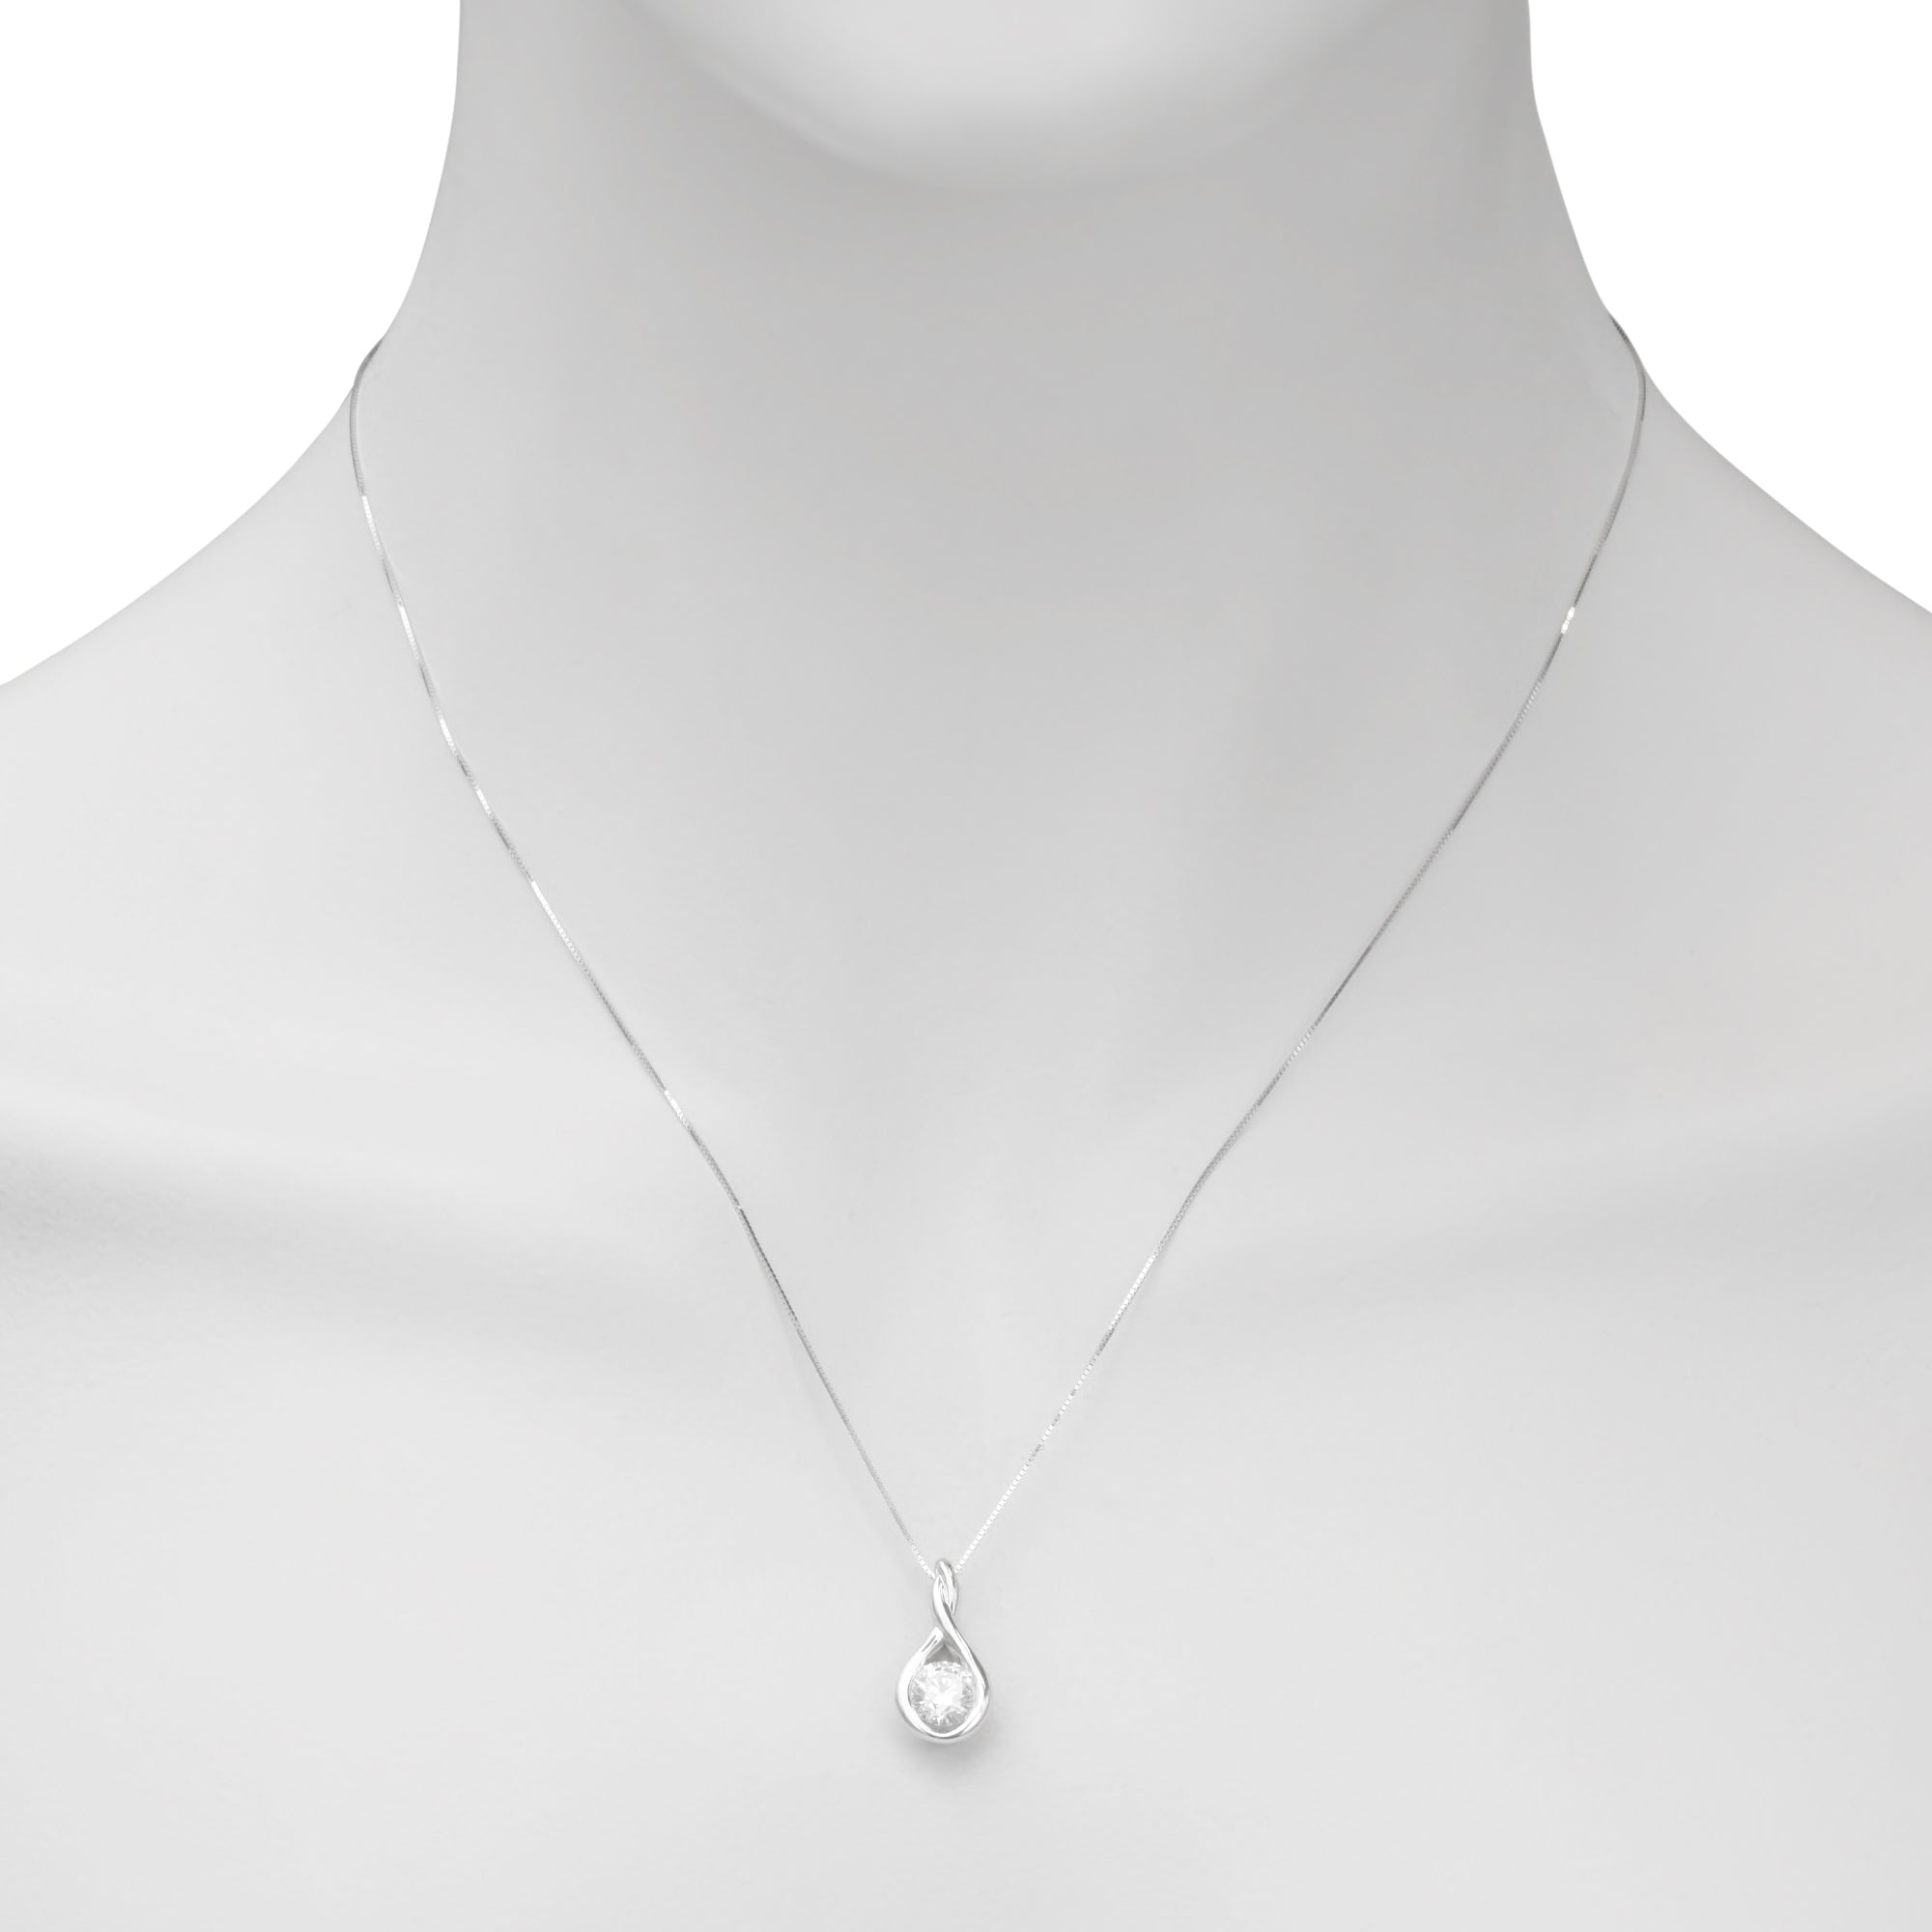 Diamond Necklace in 14kt White Gold (1ct)